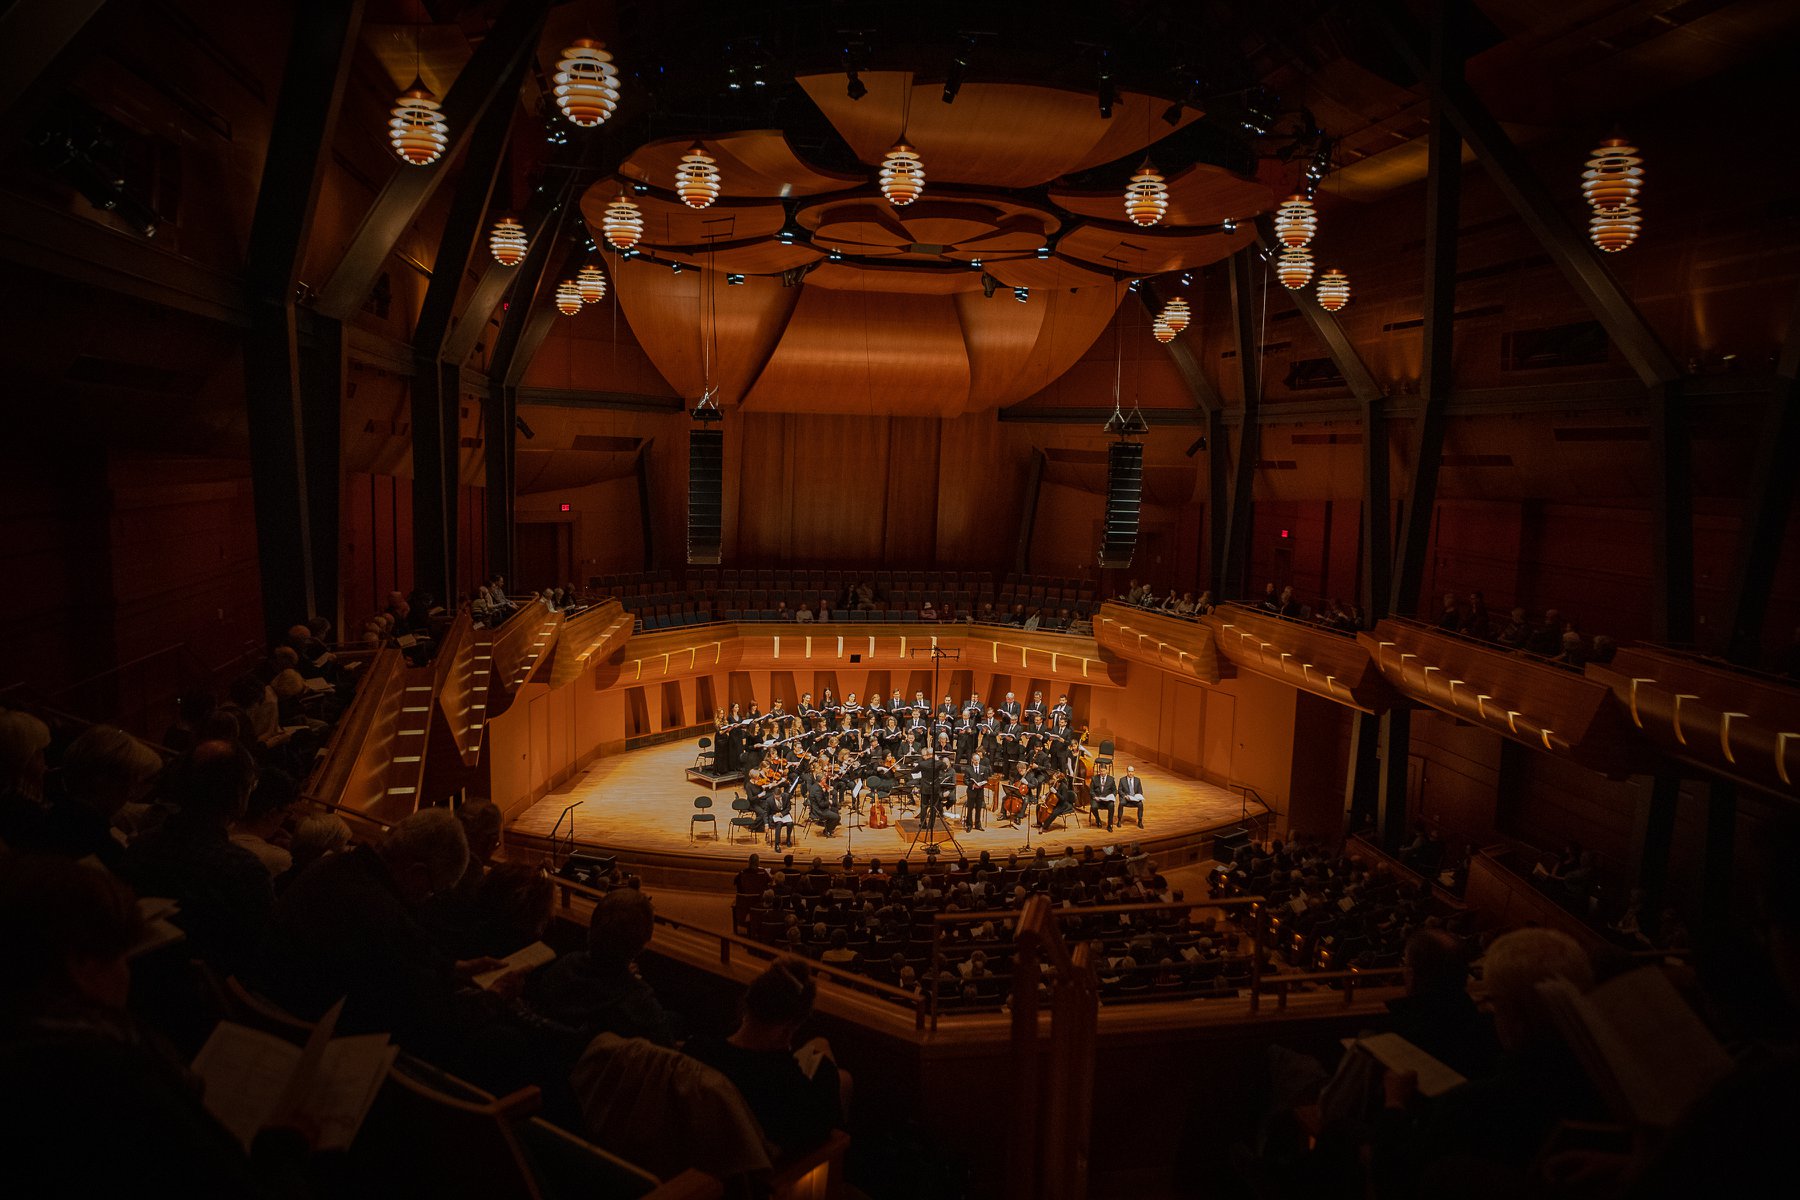 Luminous voices choir performs in a beautifully finished large dome shaped wood auditorium.